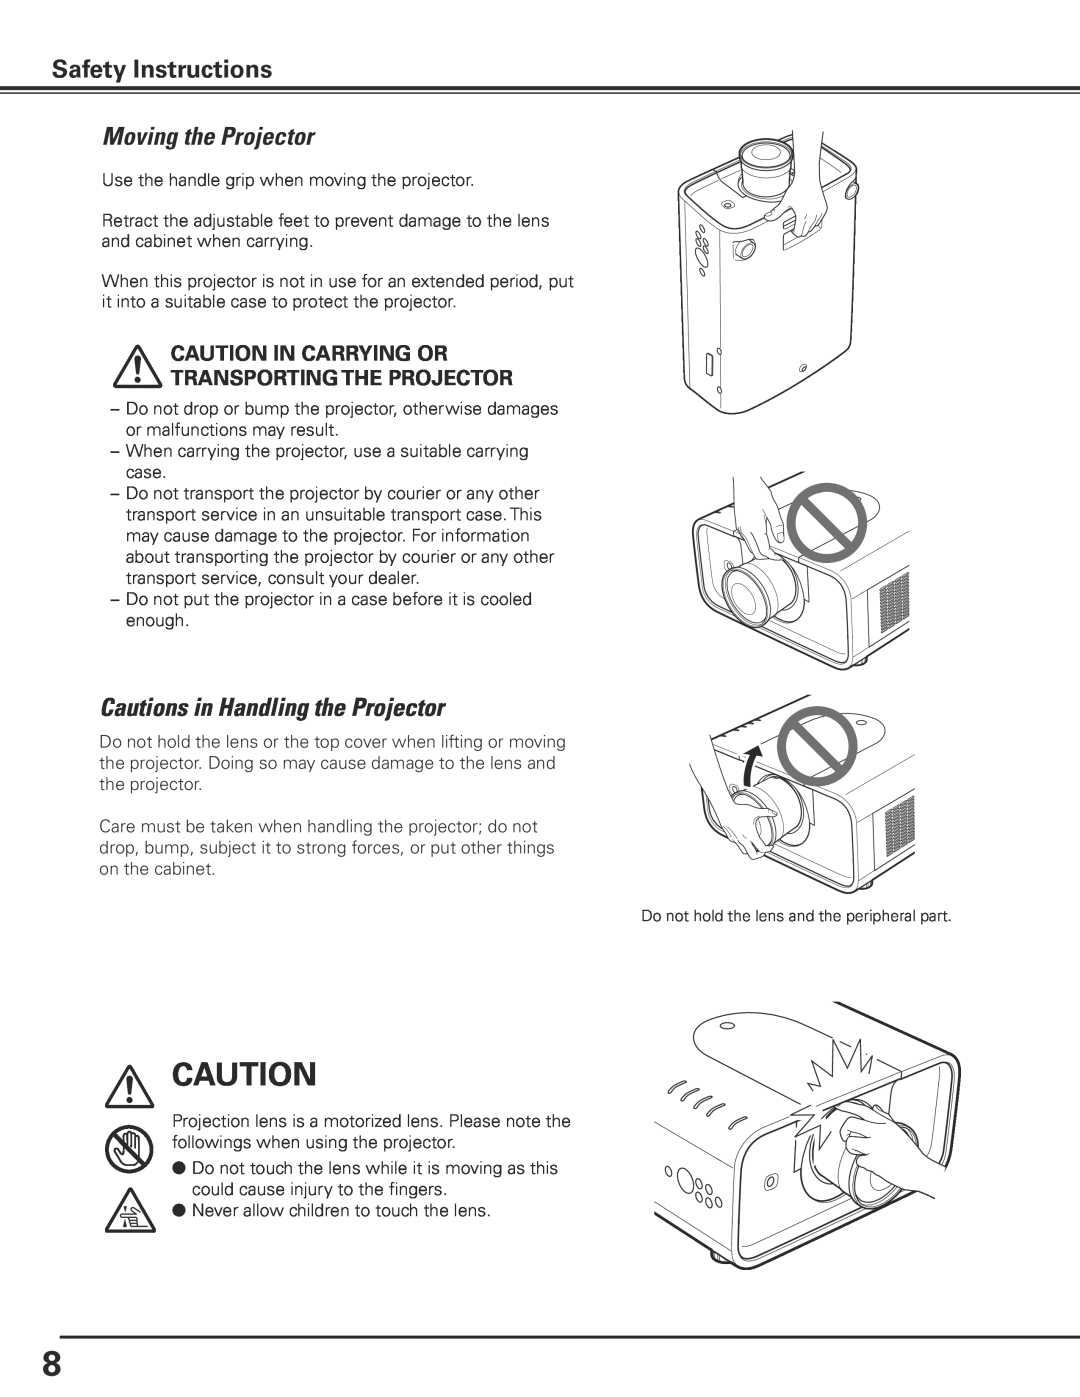 Sanyo PLC-XP200L owner manual Moving the Projector, Cautions in Handling the Projector, Safety Instructions 